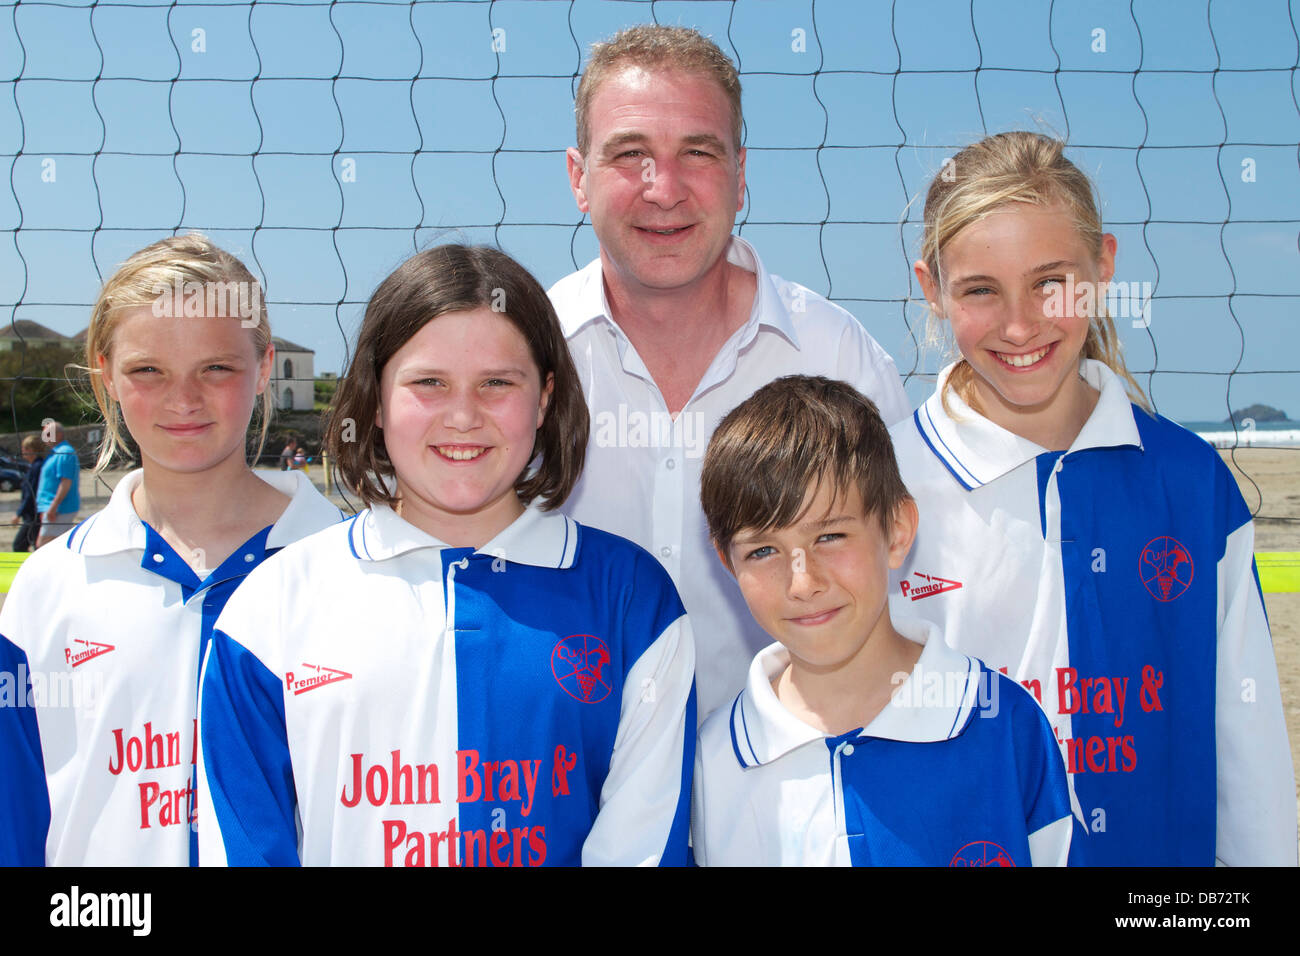 On Polzeath beach in the sun St Merryn youngsters and their Coach eagerly await match play Stock Photo